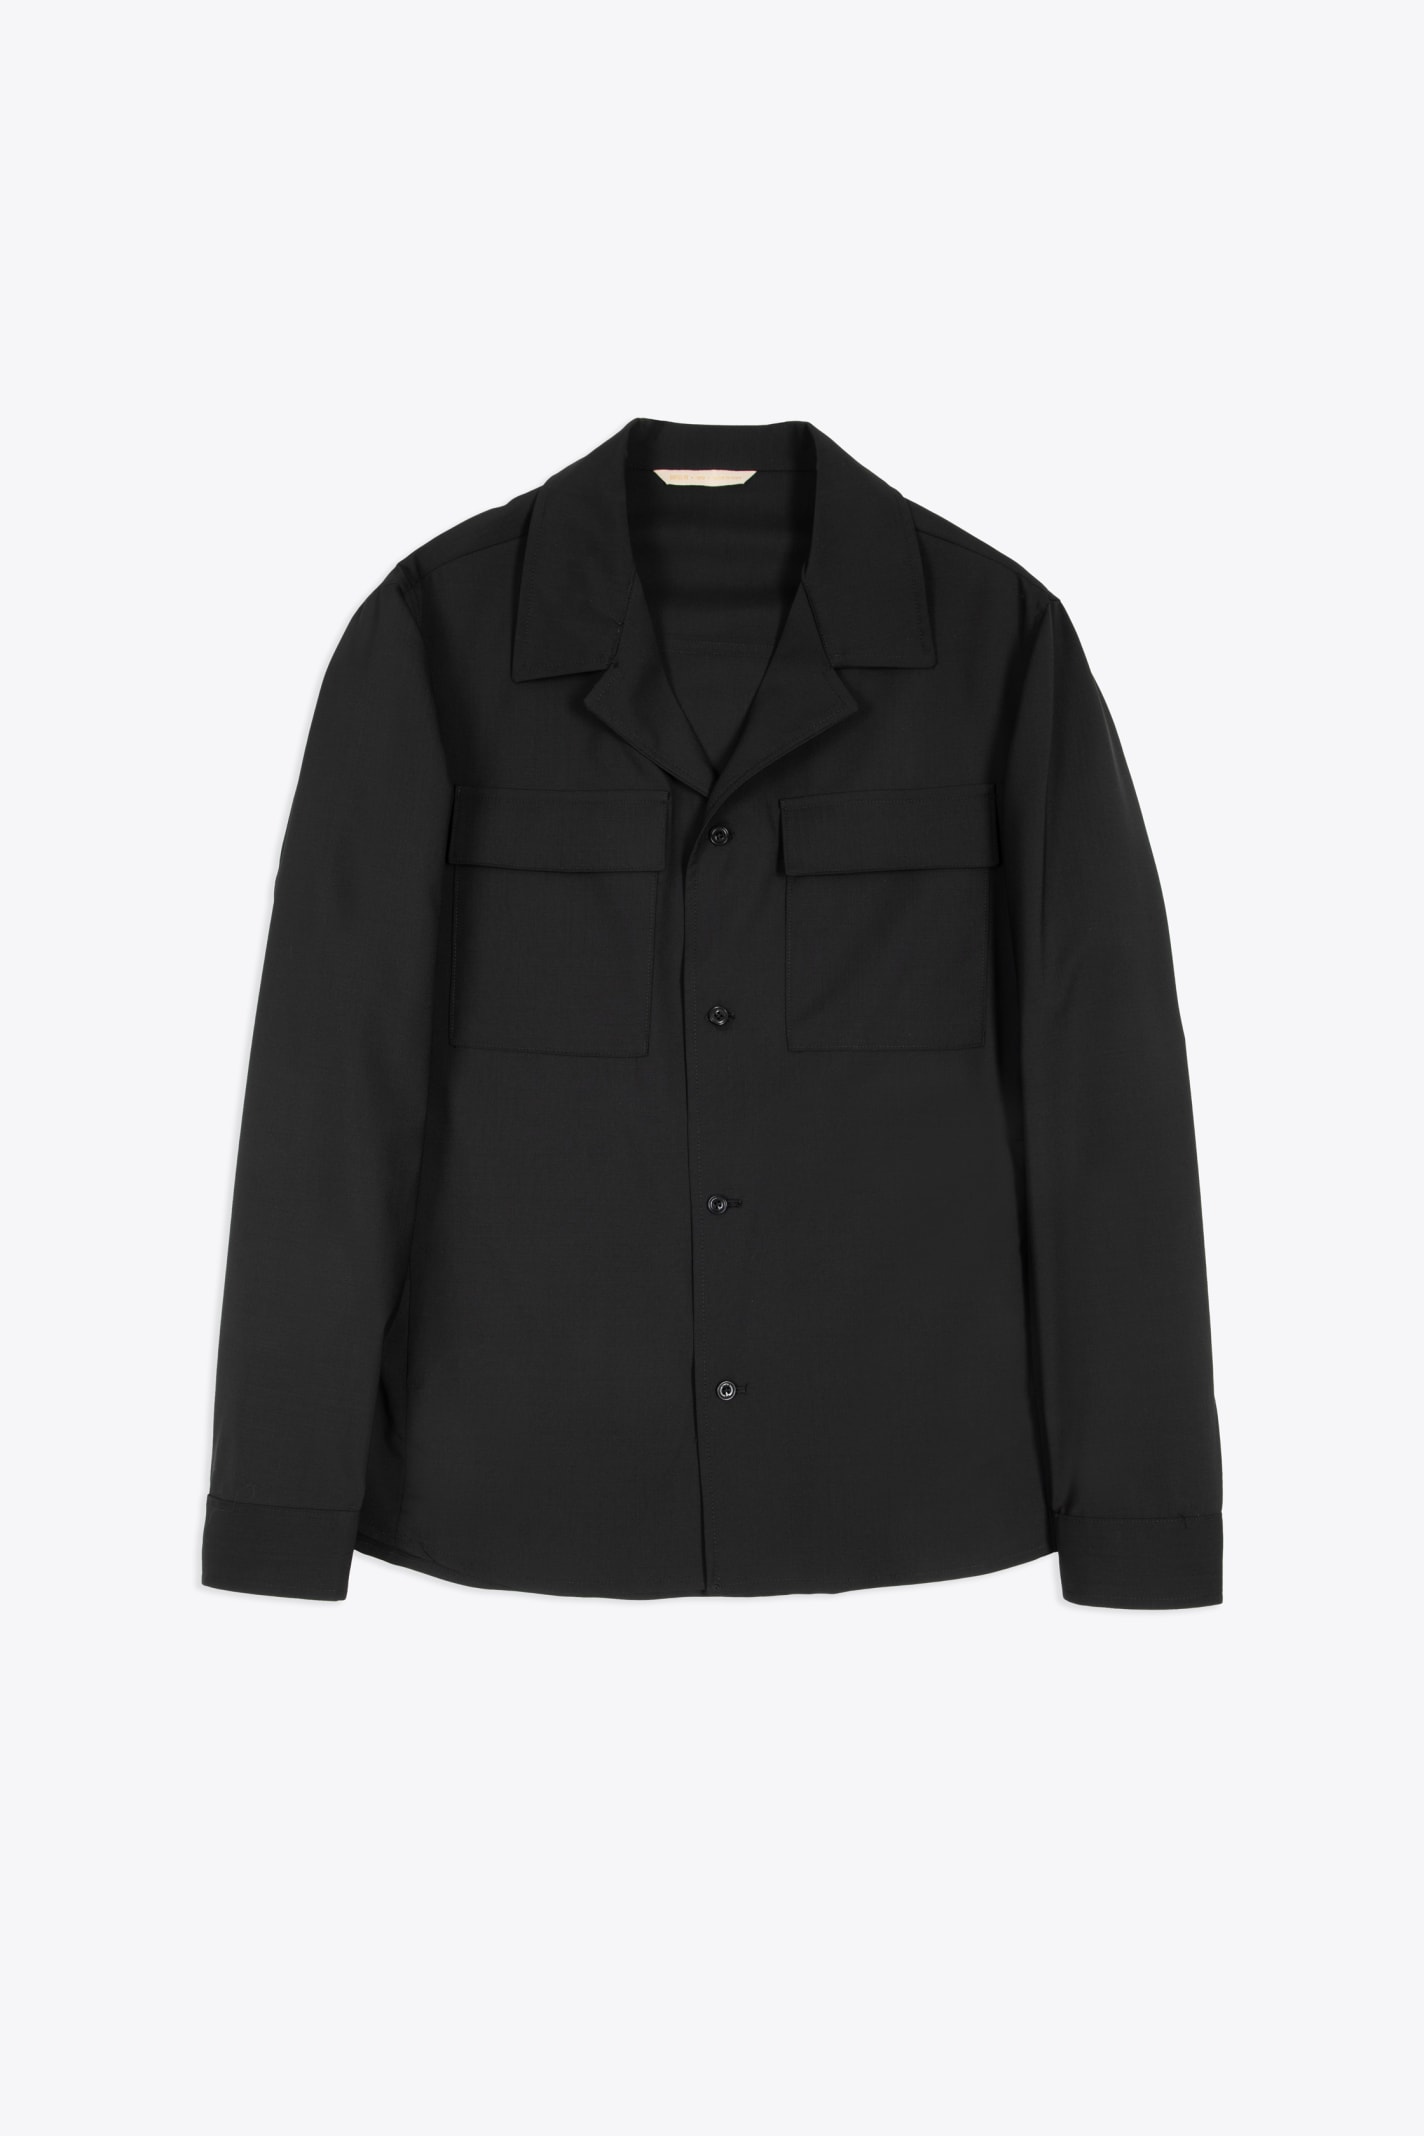 Giacca Black tailored shirt with camp collar and long sleeves - John